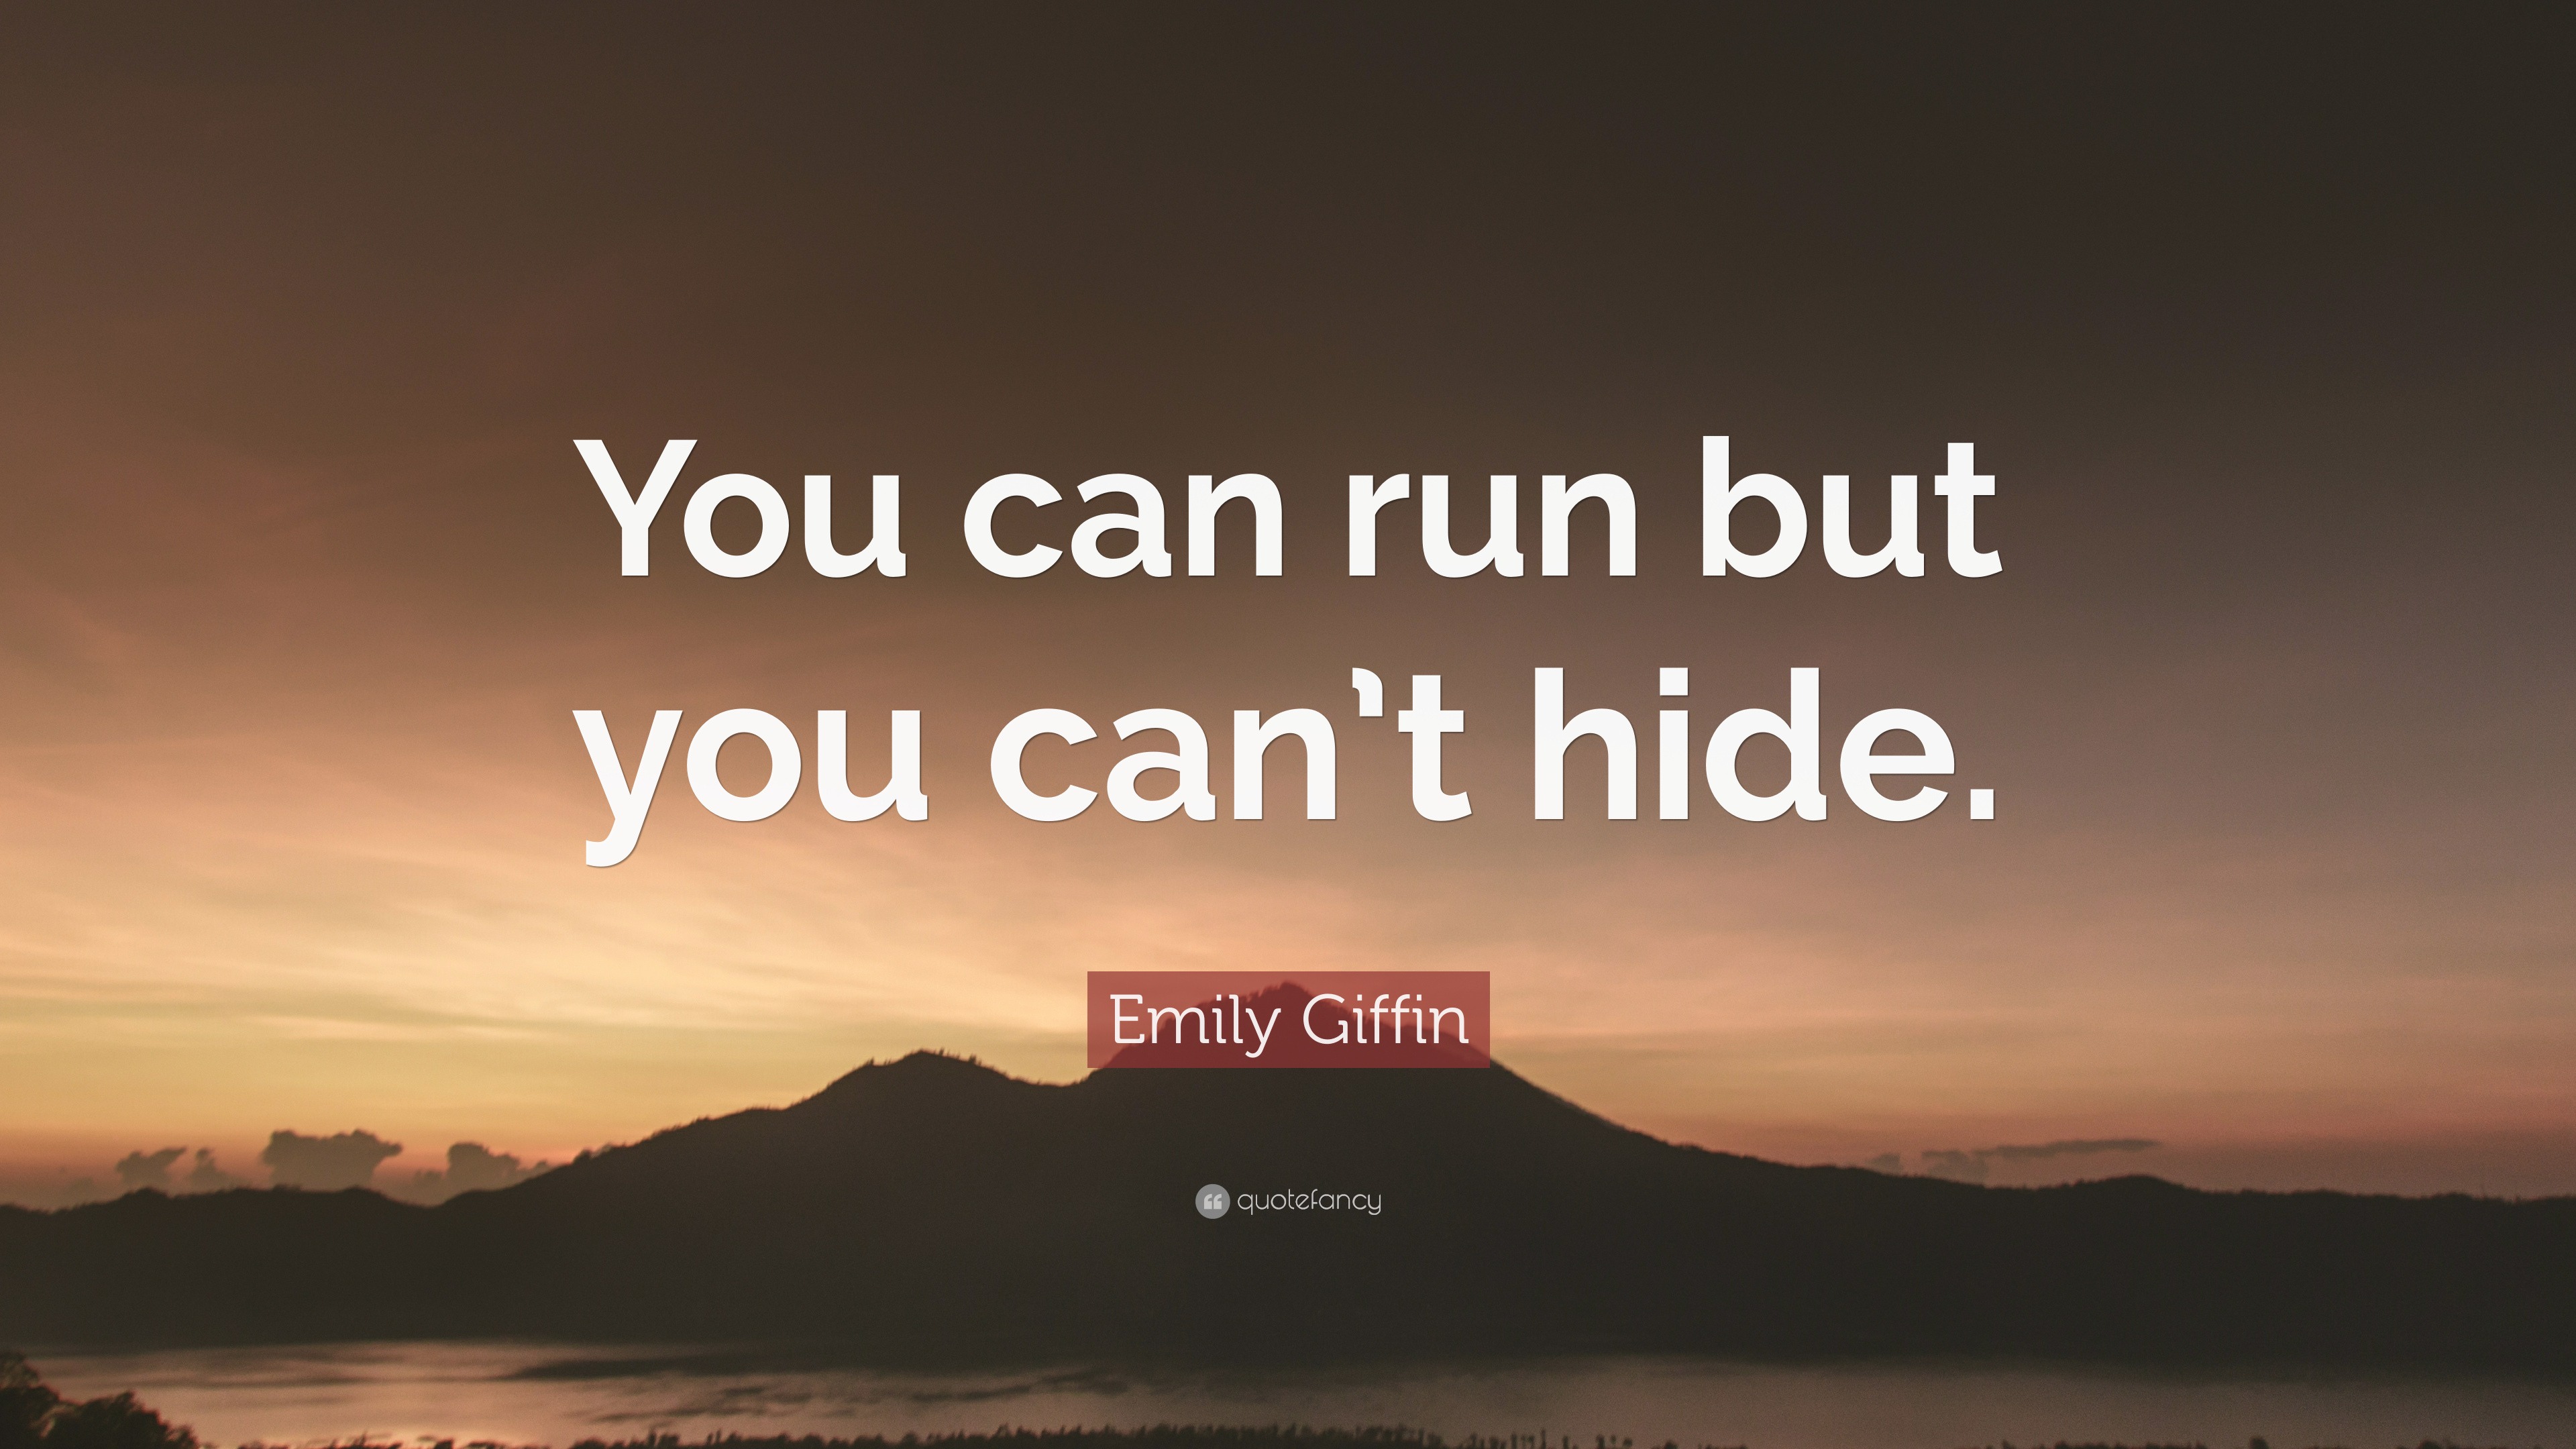 Emily Giffin Quote: “You can run but you can’t hide.”